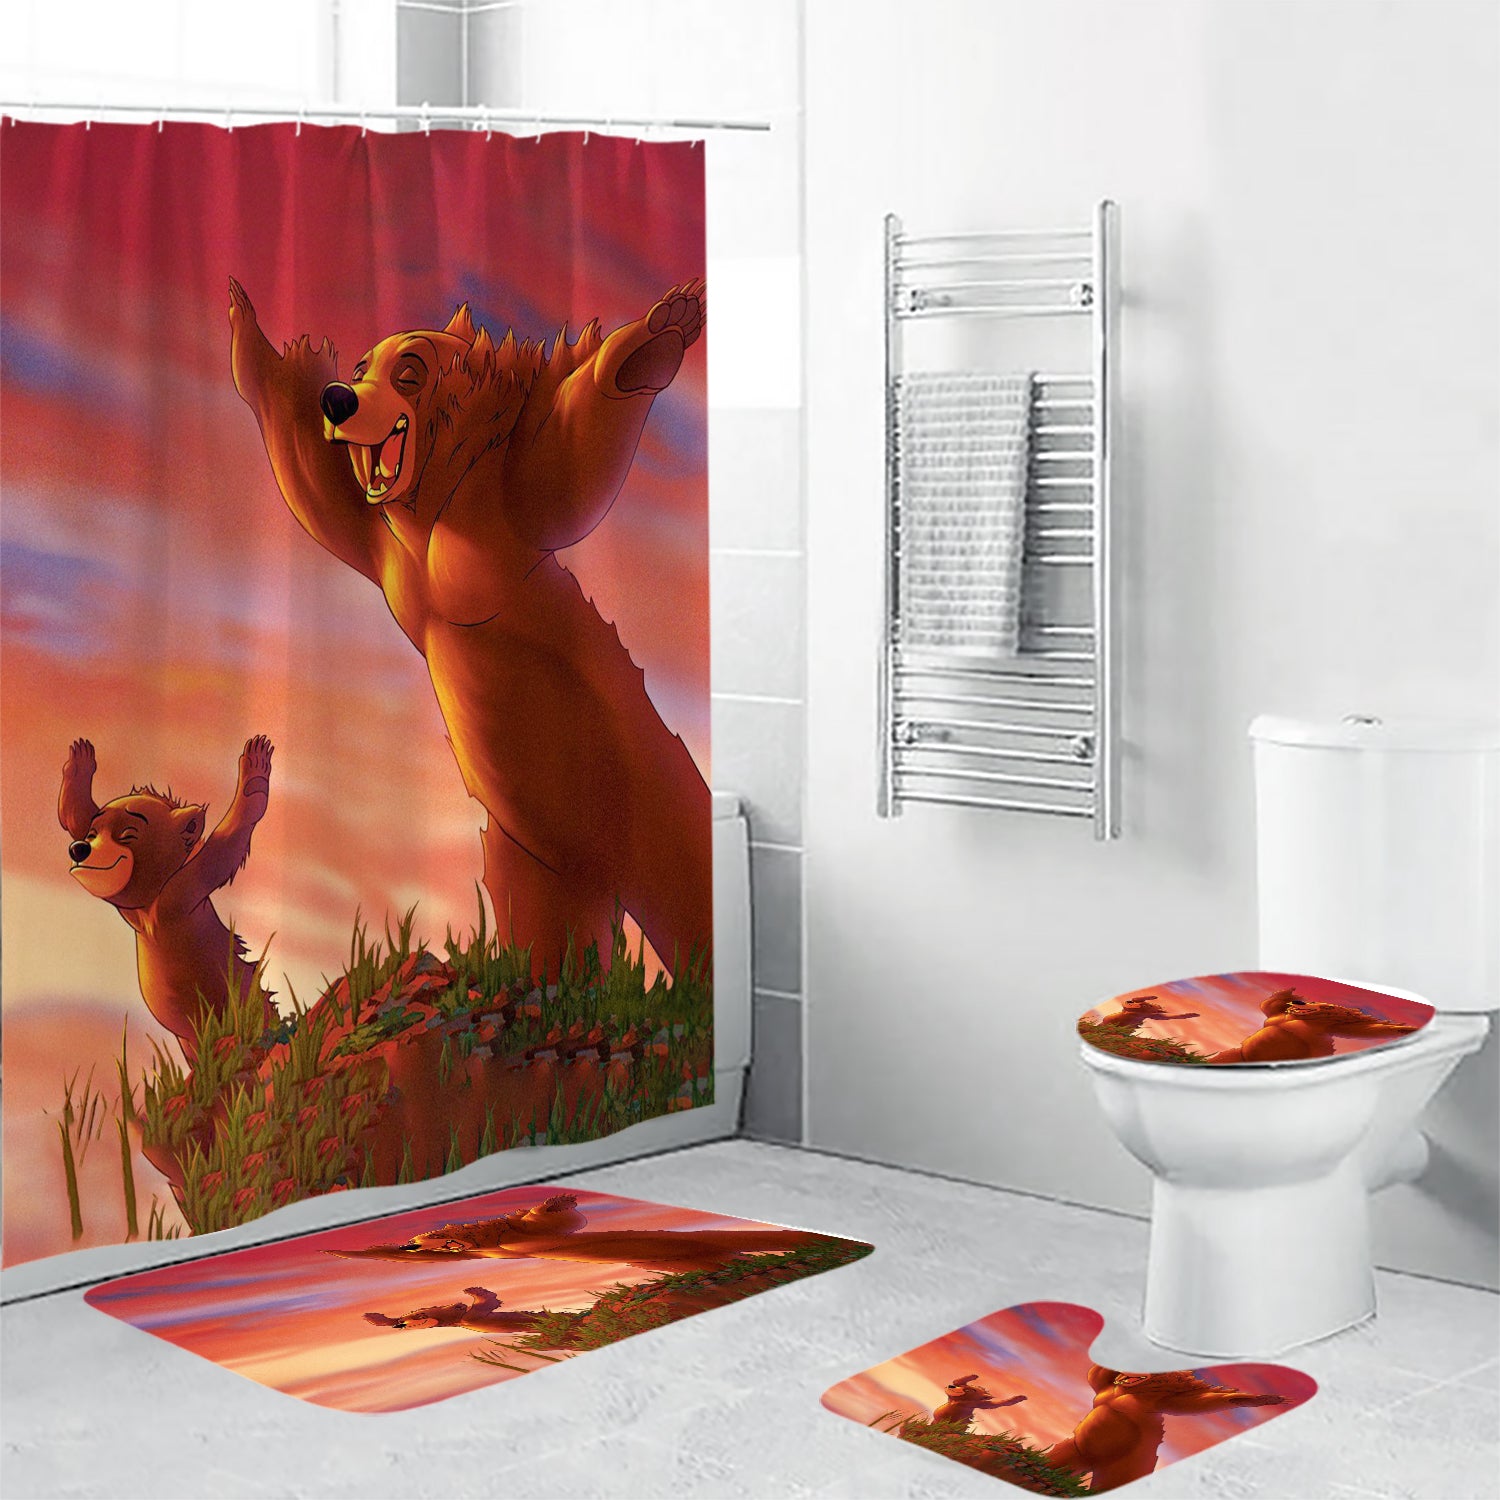 Brother Bear Poster 3 4PCS Shower Curtain Non-Slip Toilet Lid Cover Bath Mat - Bathroom Set Fans Gifts